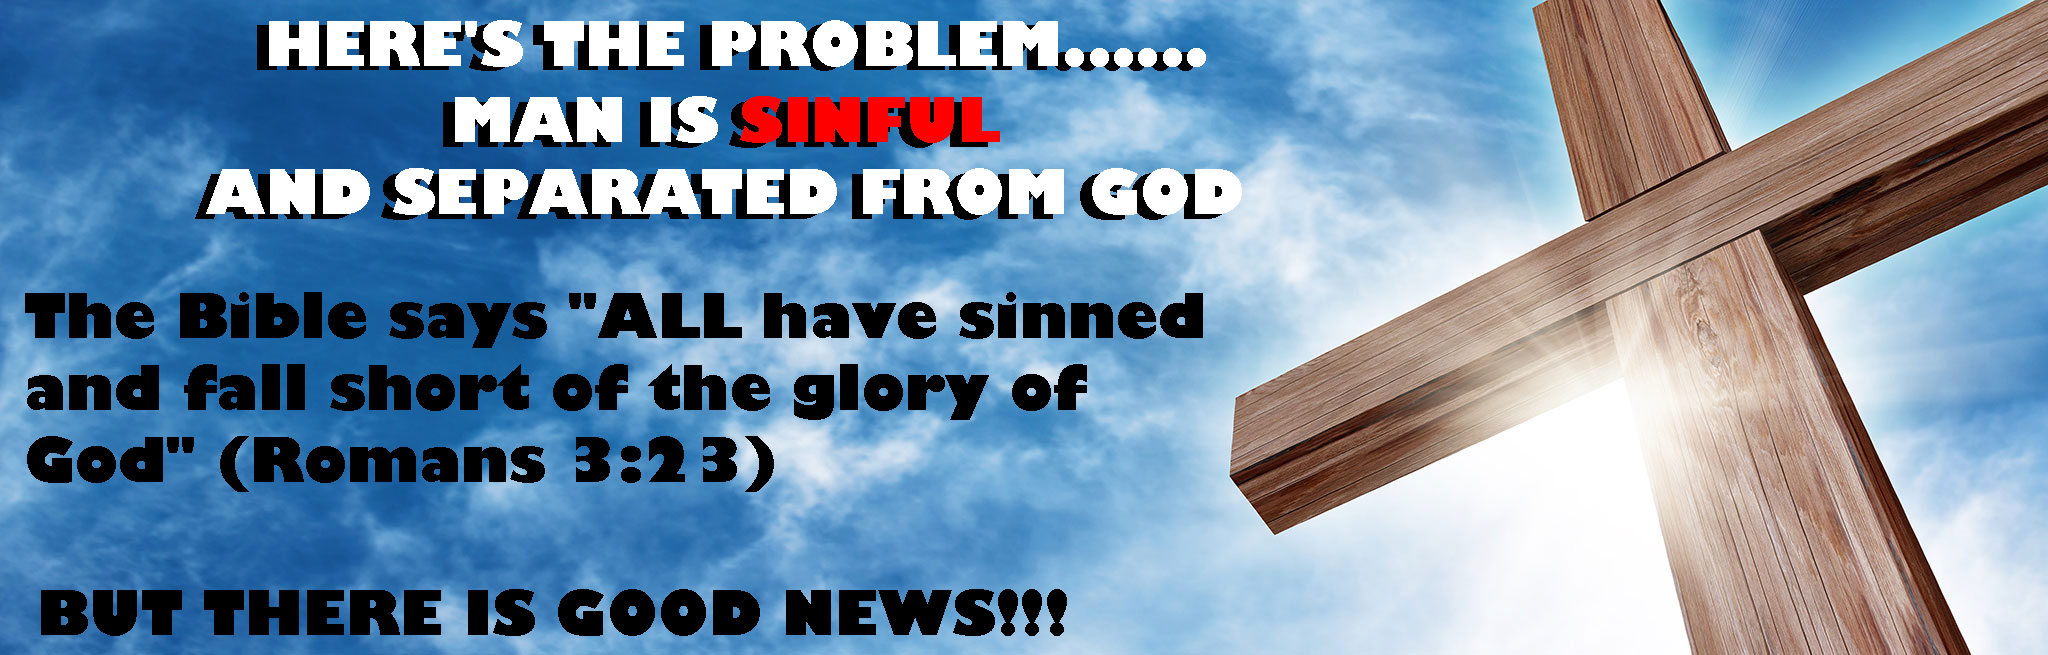 here's the problem: man is sinful and separated from God